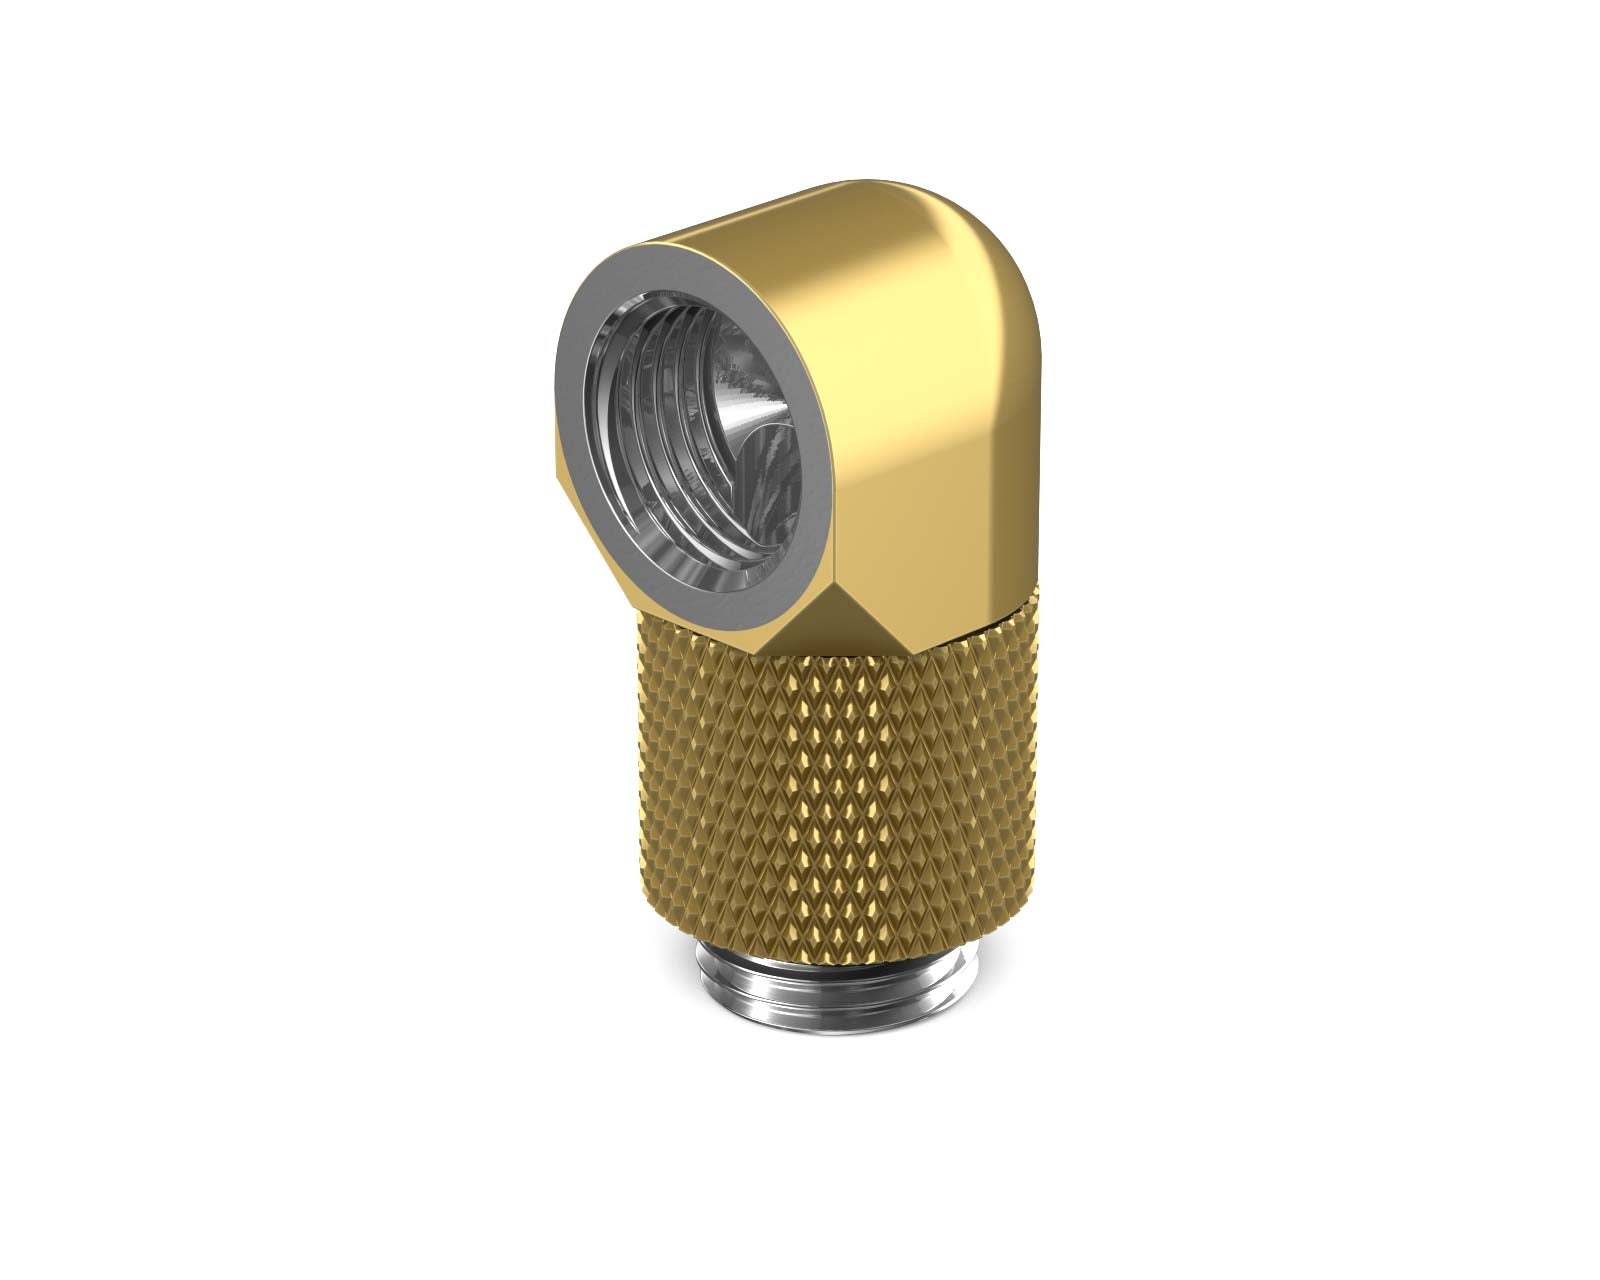 PrimoChill Male to Female G 1/4in. 90 Degree SX Rotary 15mm Extension Elbow Fitting - PrimoChill - KEEPING IT COOL Candy Gold